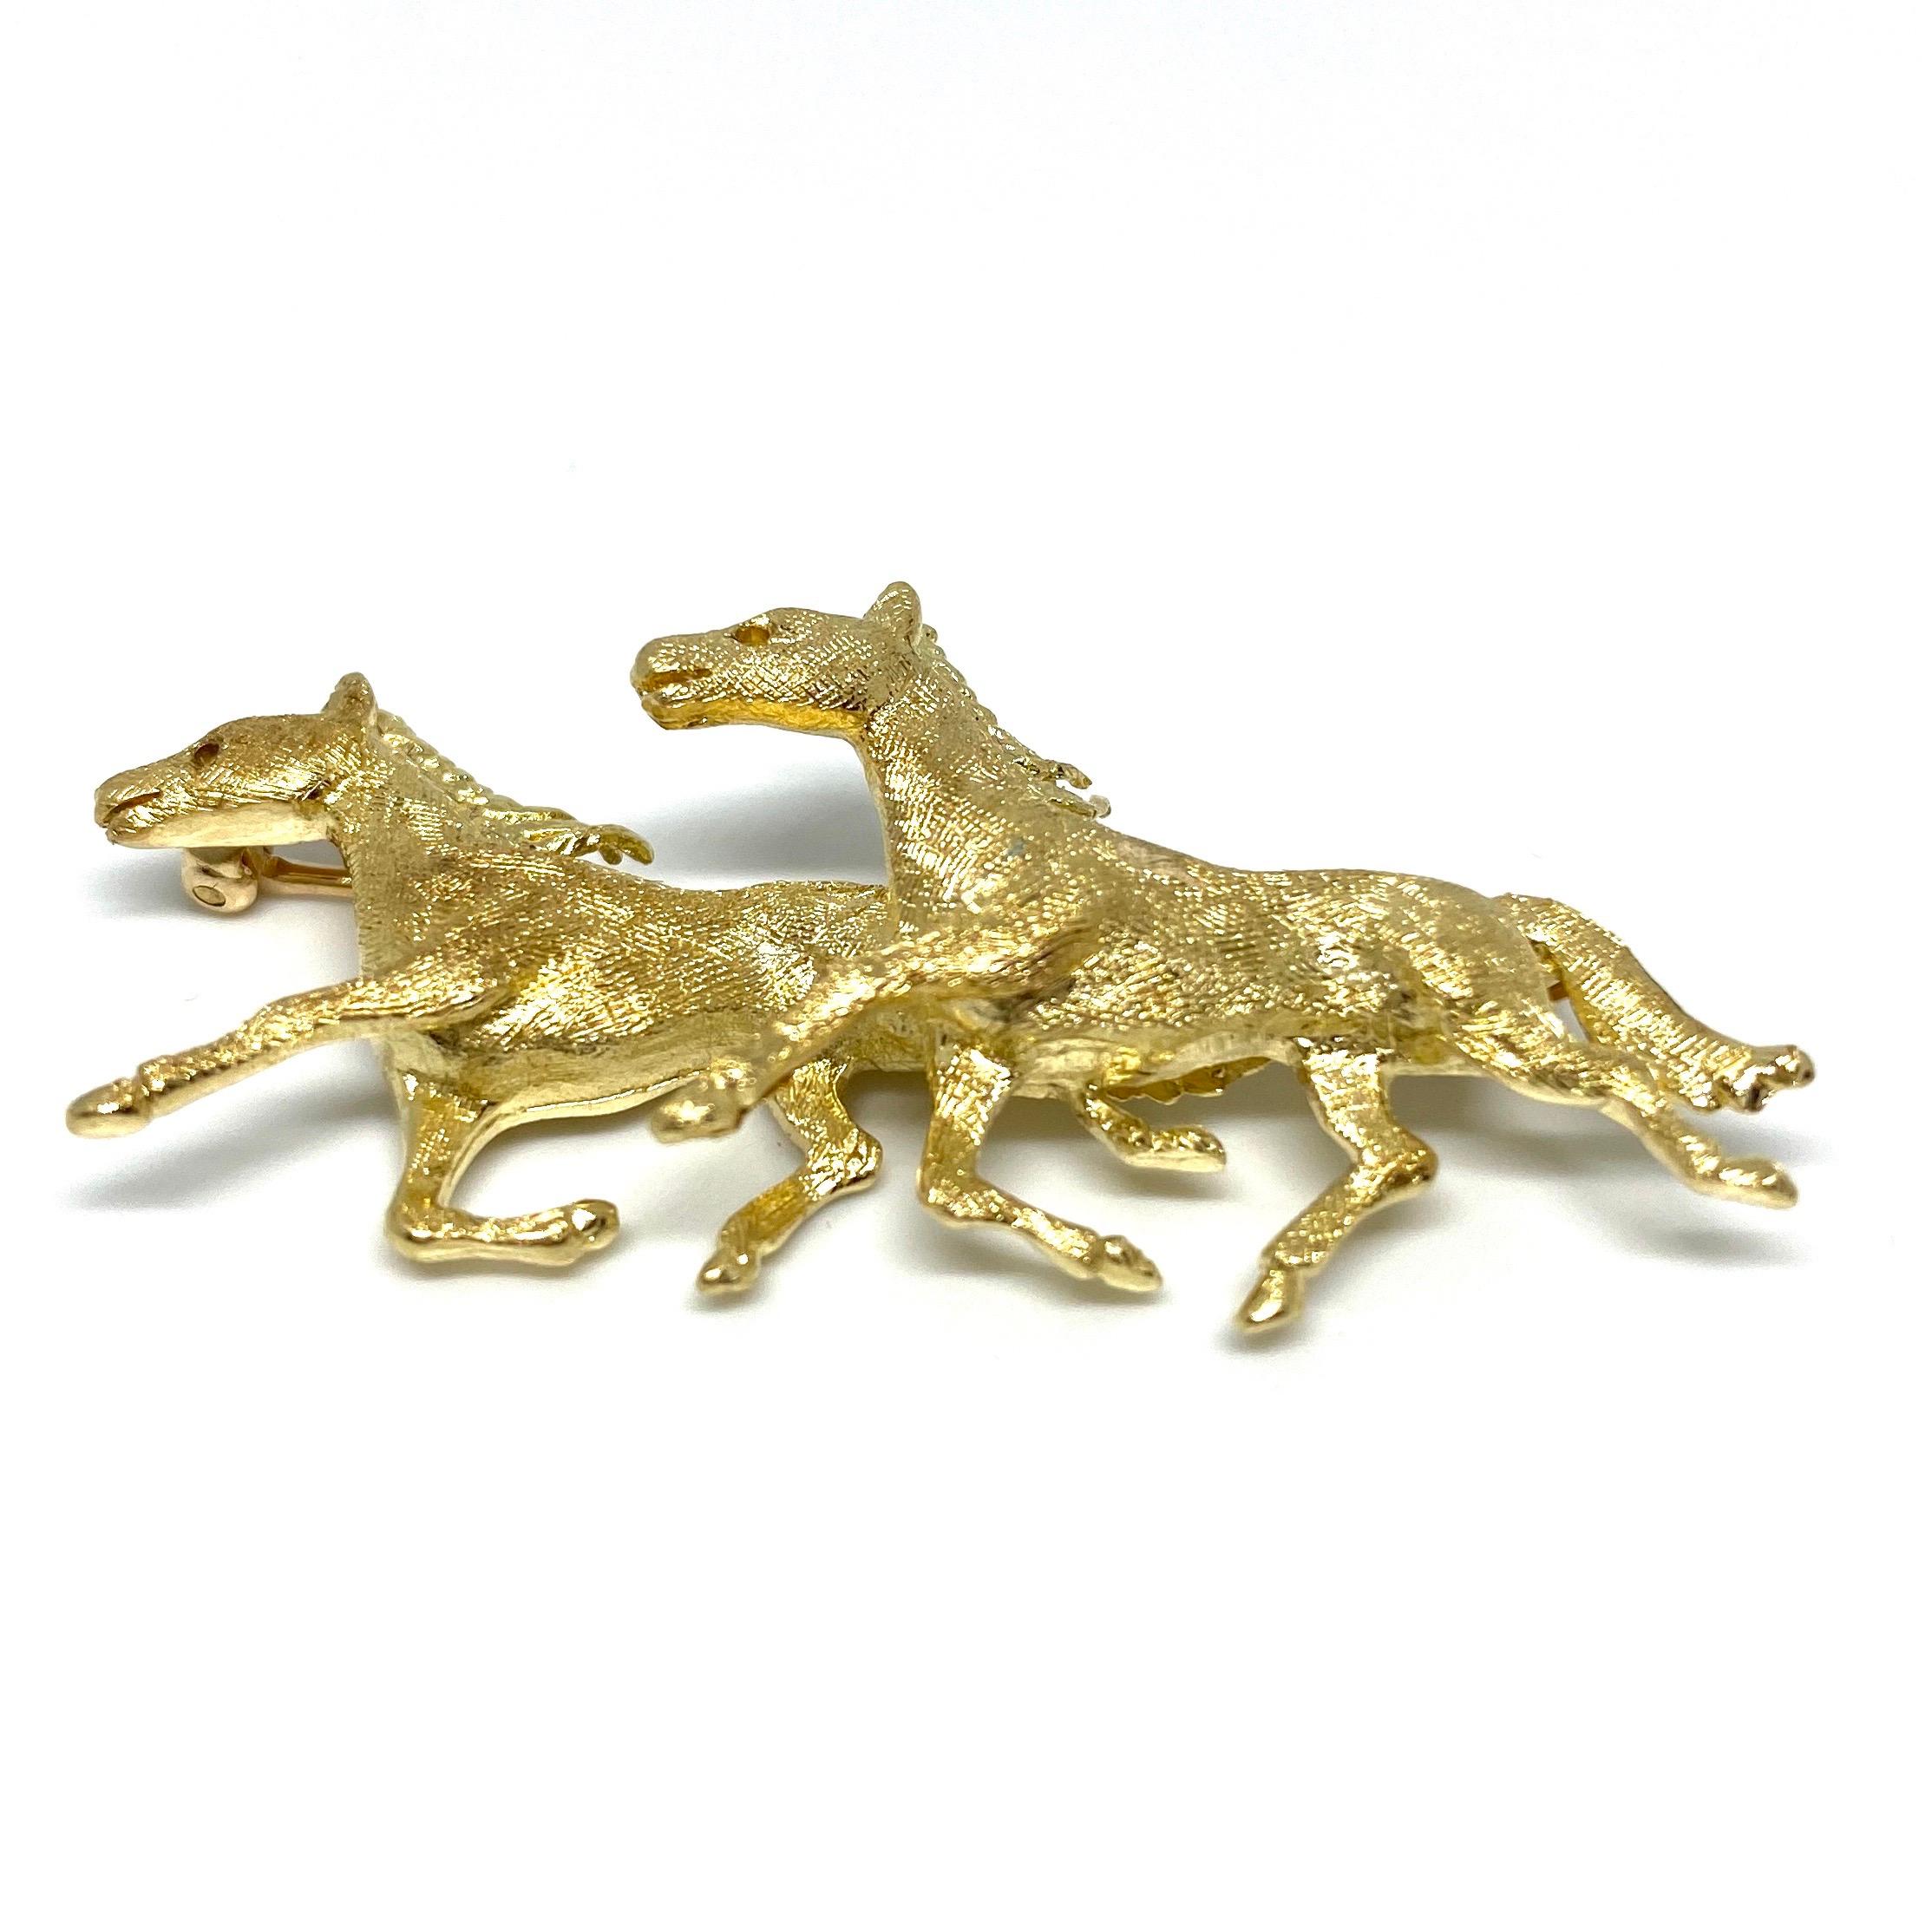 Crafted in 14k yellow gold, the pin features two horses in motion. Satin finish adds extra shine to this beautiful piece. 
Measurements:
2” W x 7/8” H x 3/8” D
Weight: 7.6 grams
Condition: excellent